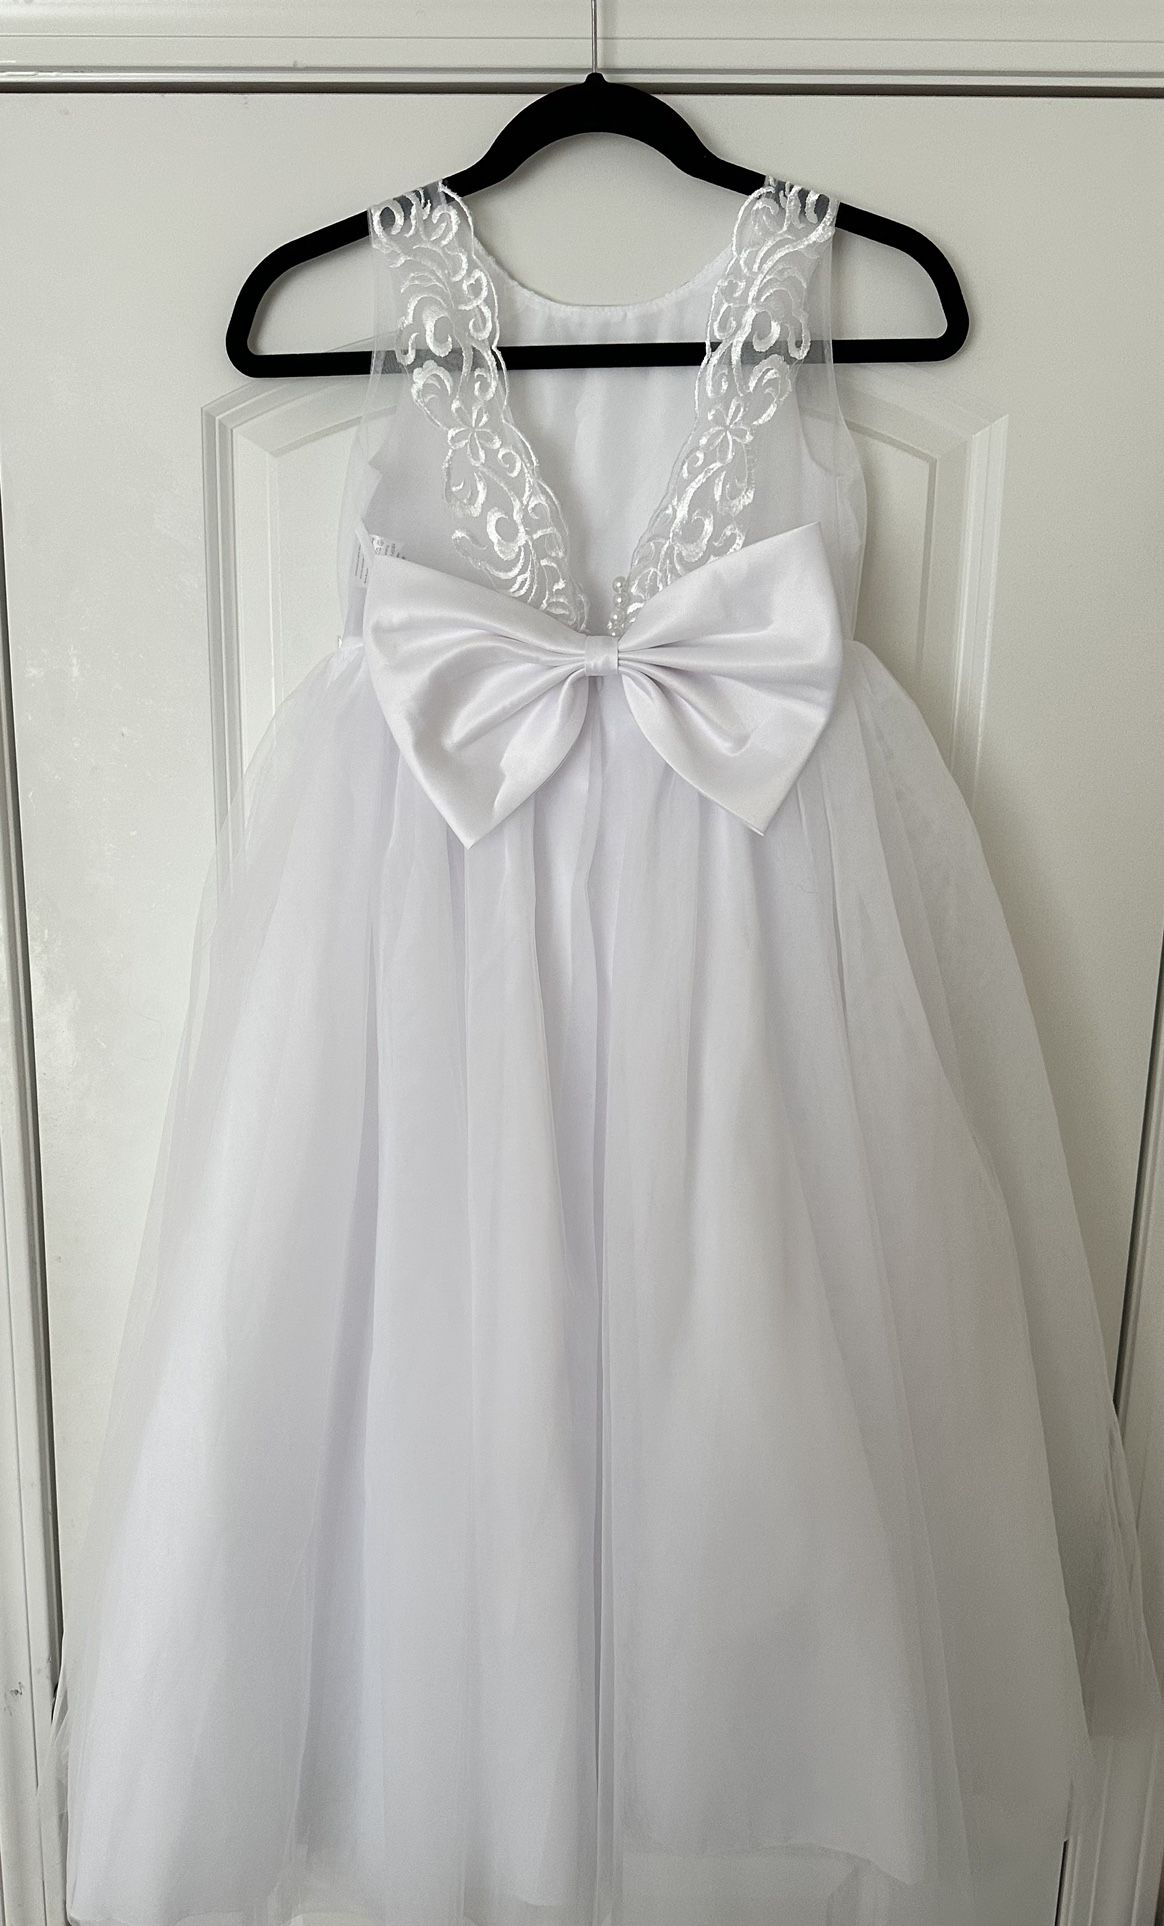 New Little/Big Girls Long Lace Dresses in White , sizes are 6,7,8,9 y.o